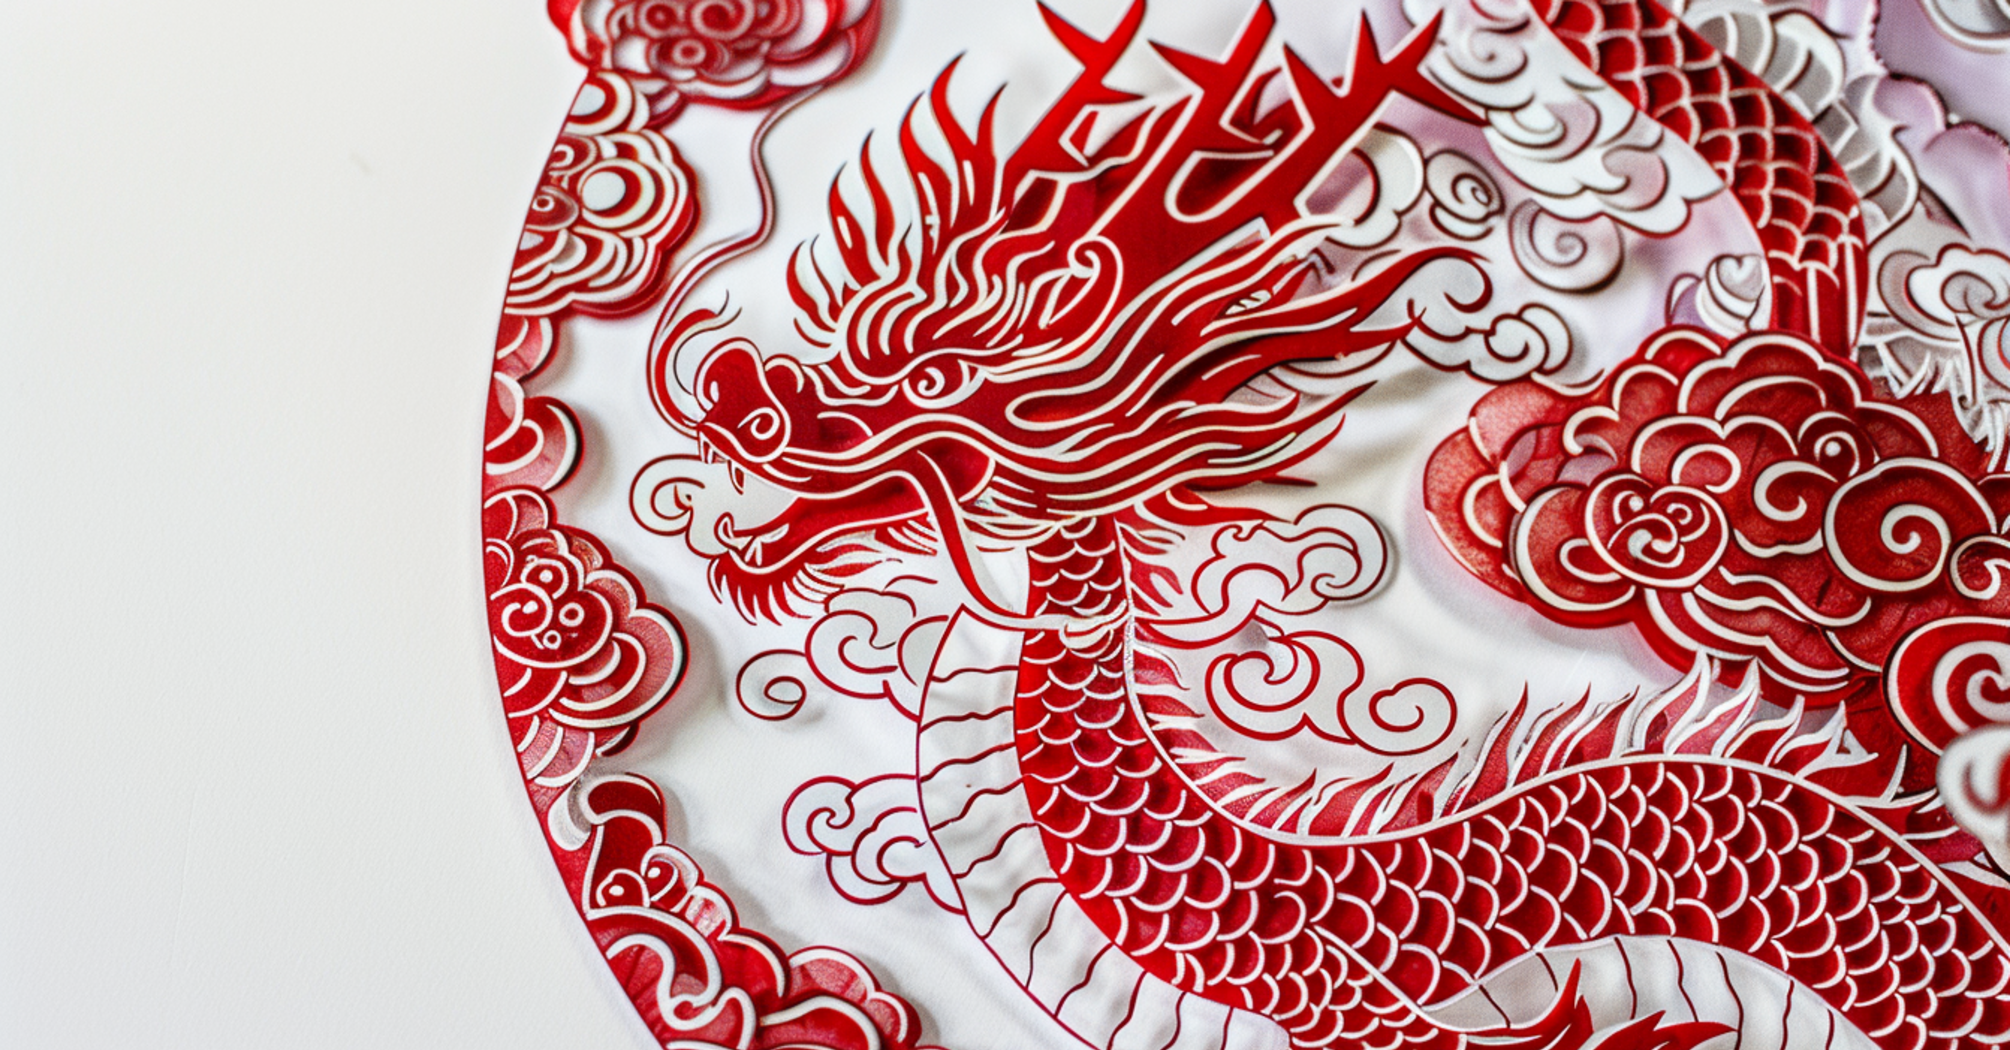 Remain cautious in decision-making: Chinese horoscope for June 14